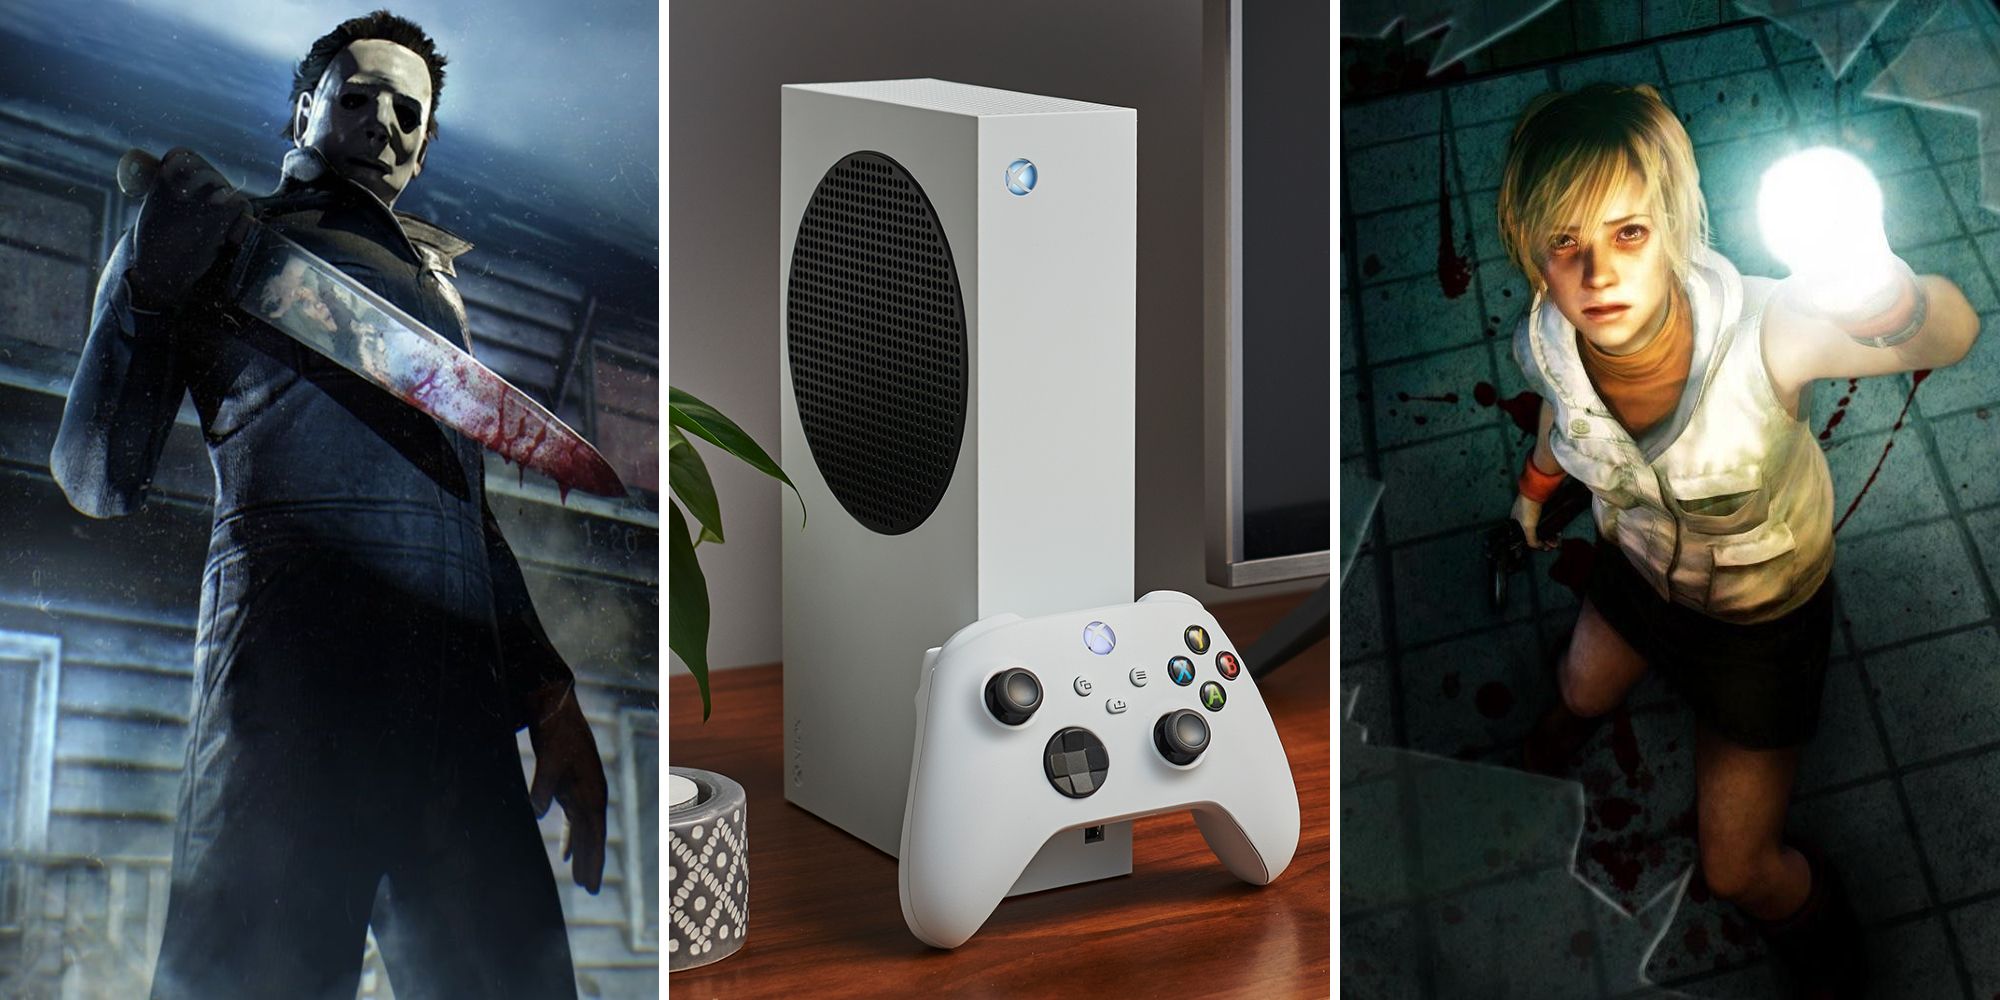 Mike Myers in Dead by Daylight, and Xbox Series S, and the main character of Silent Hill 3